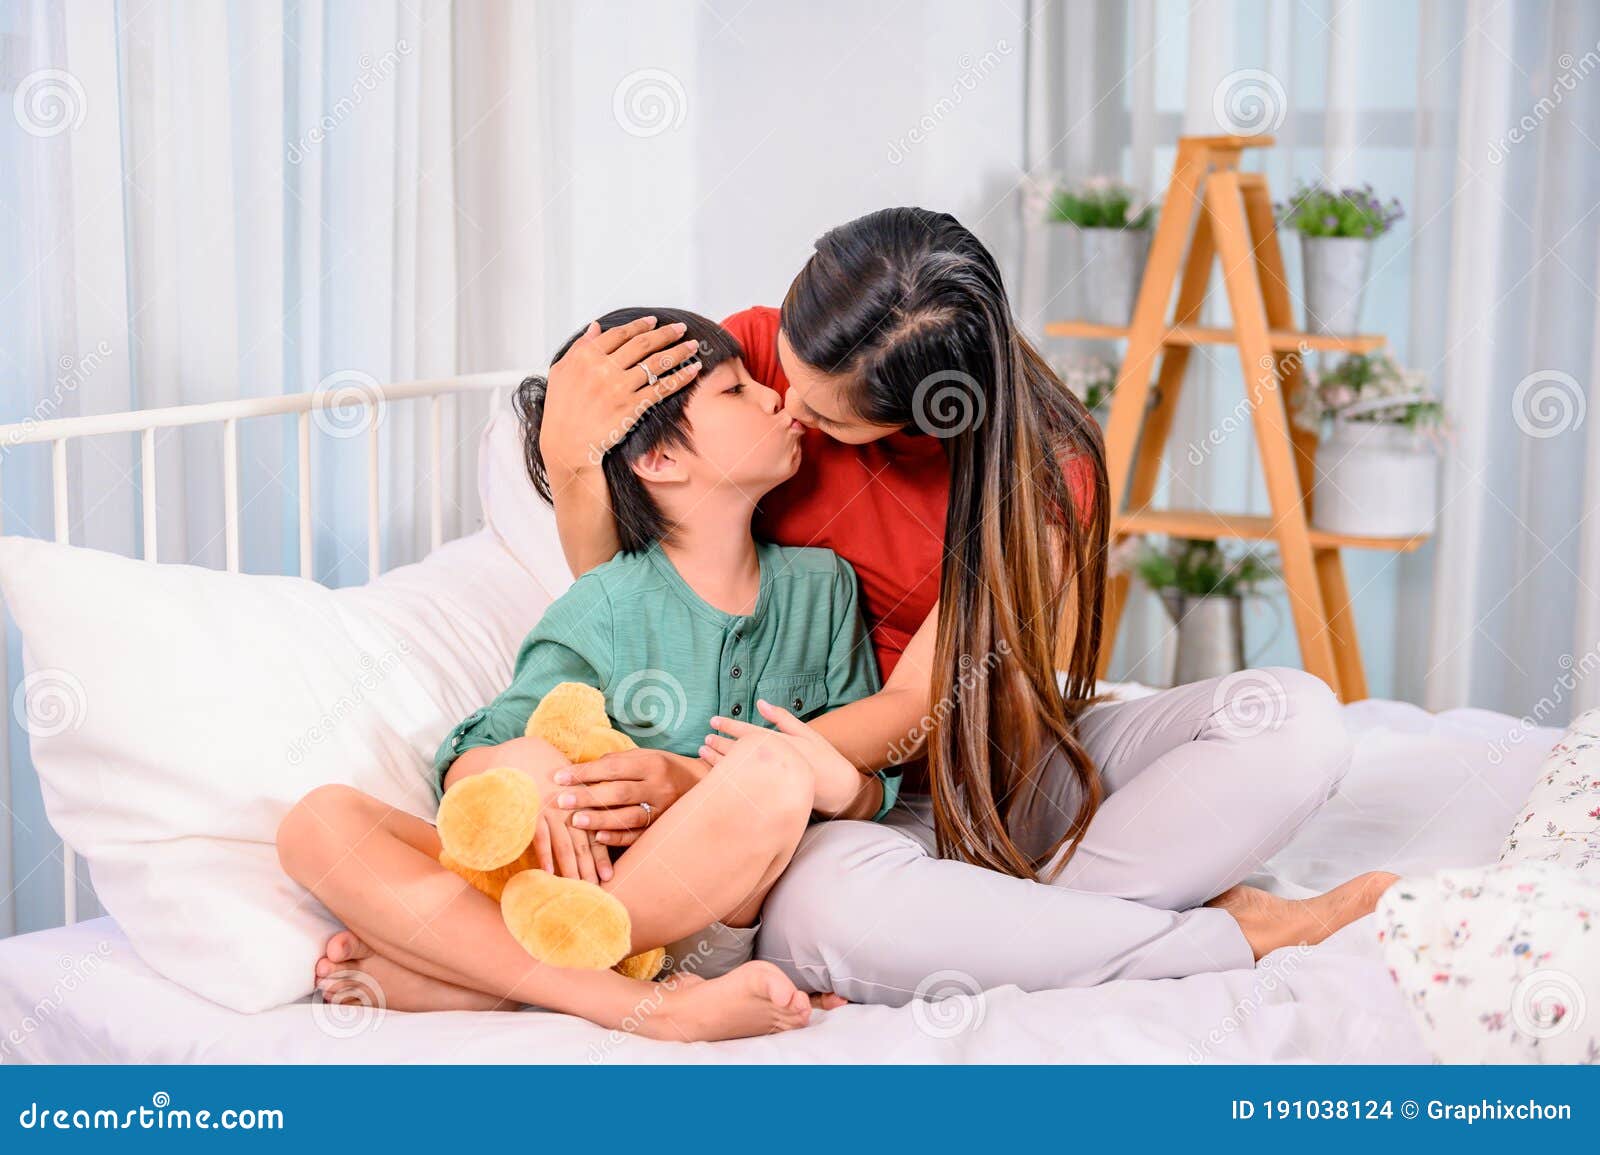 Mom Hug And Kiss Son On The Bed Woman Lifestyle And Family Activit